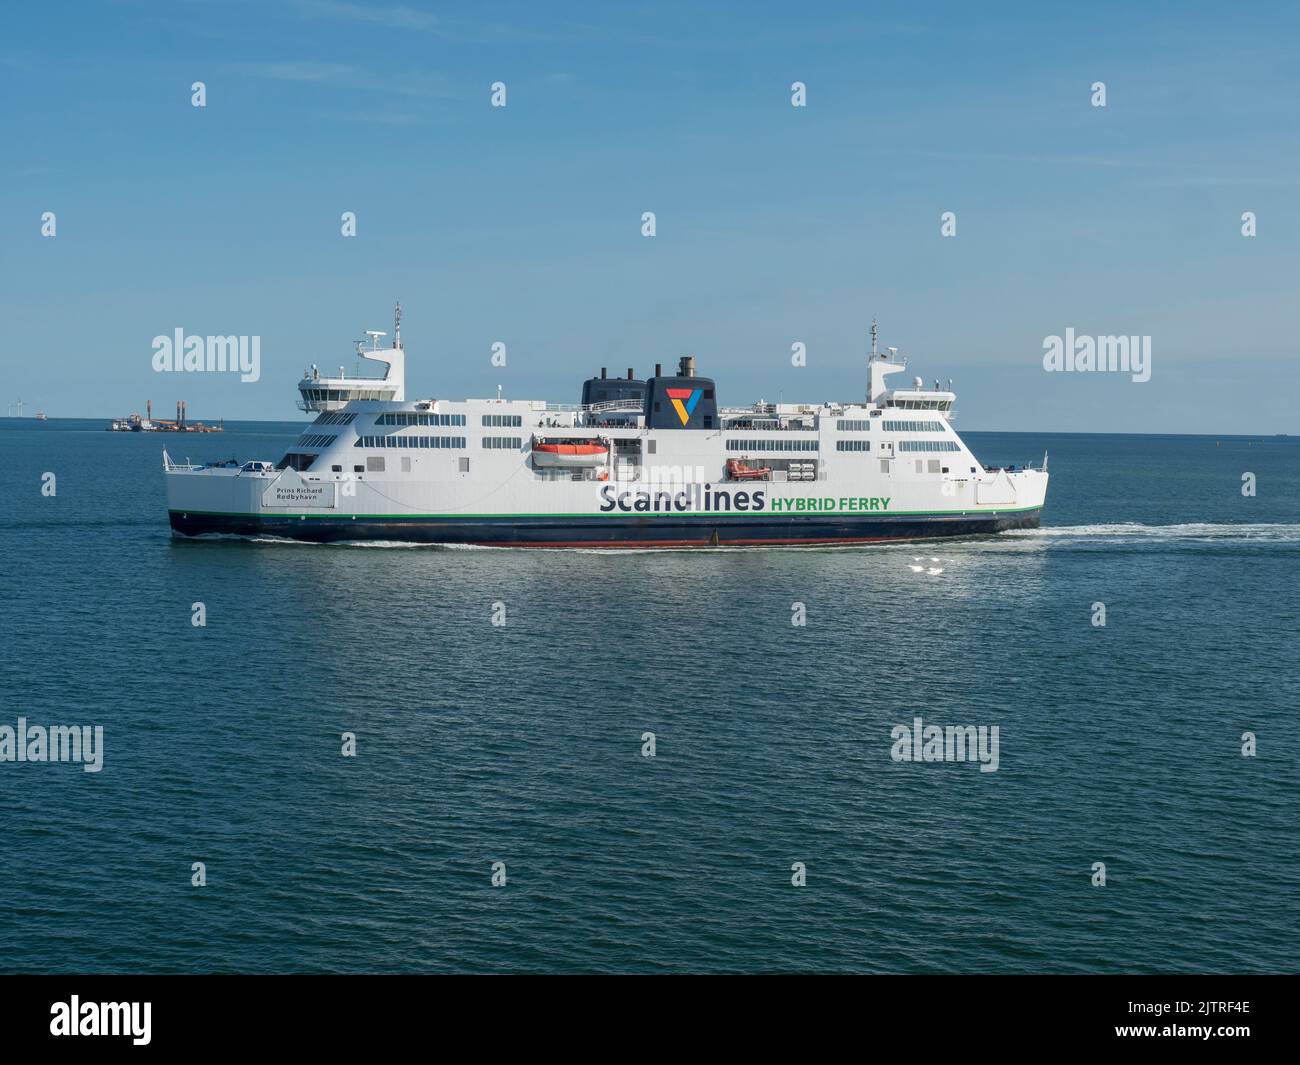 Rodbyhavn, Denmark, Agust 21, 2021: Close up view of Scandlines Hybrid Ferry boat on sea route Rodby - Puttgarden, between Denmark and Germany. Stock Photo